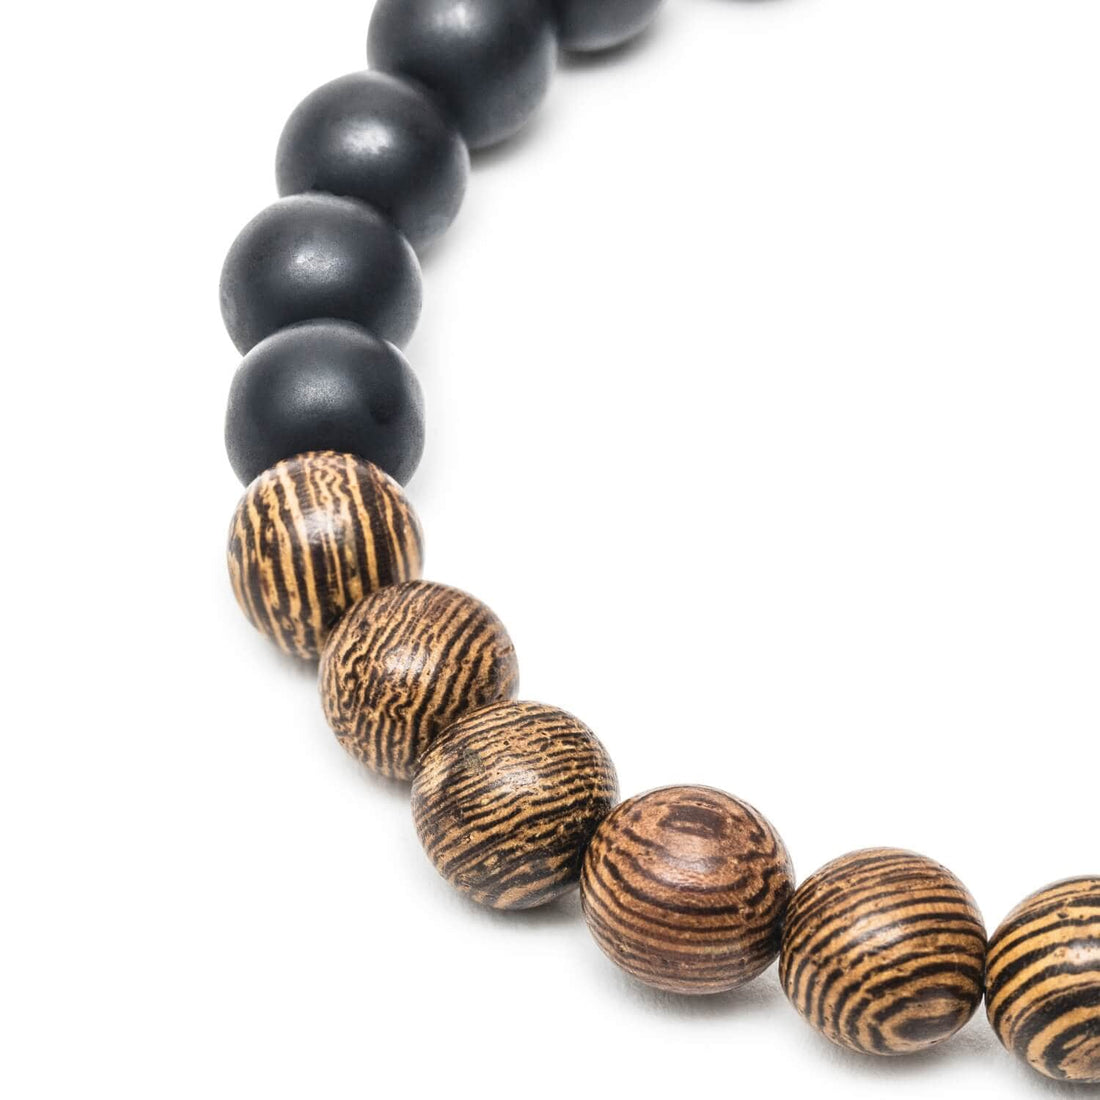 Onyx Bracelet with Wooden Beads for men